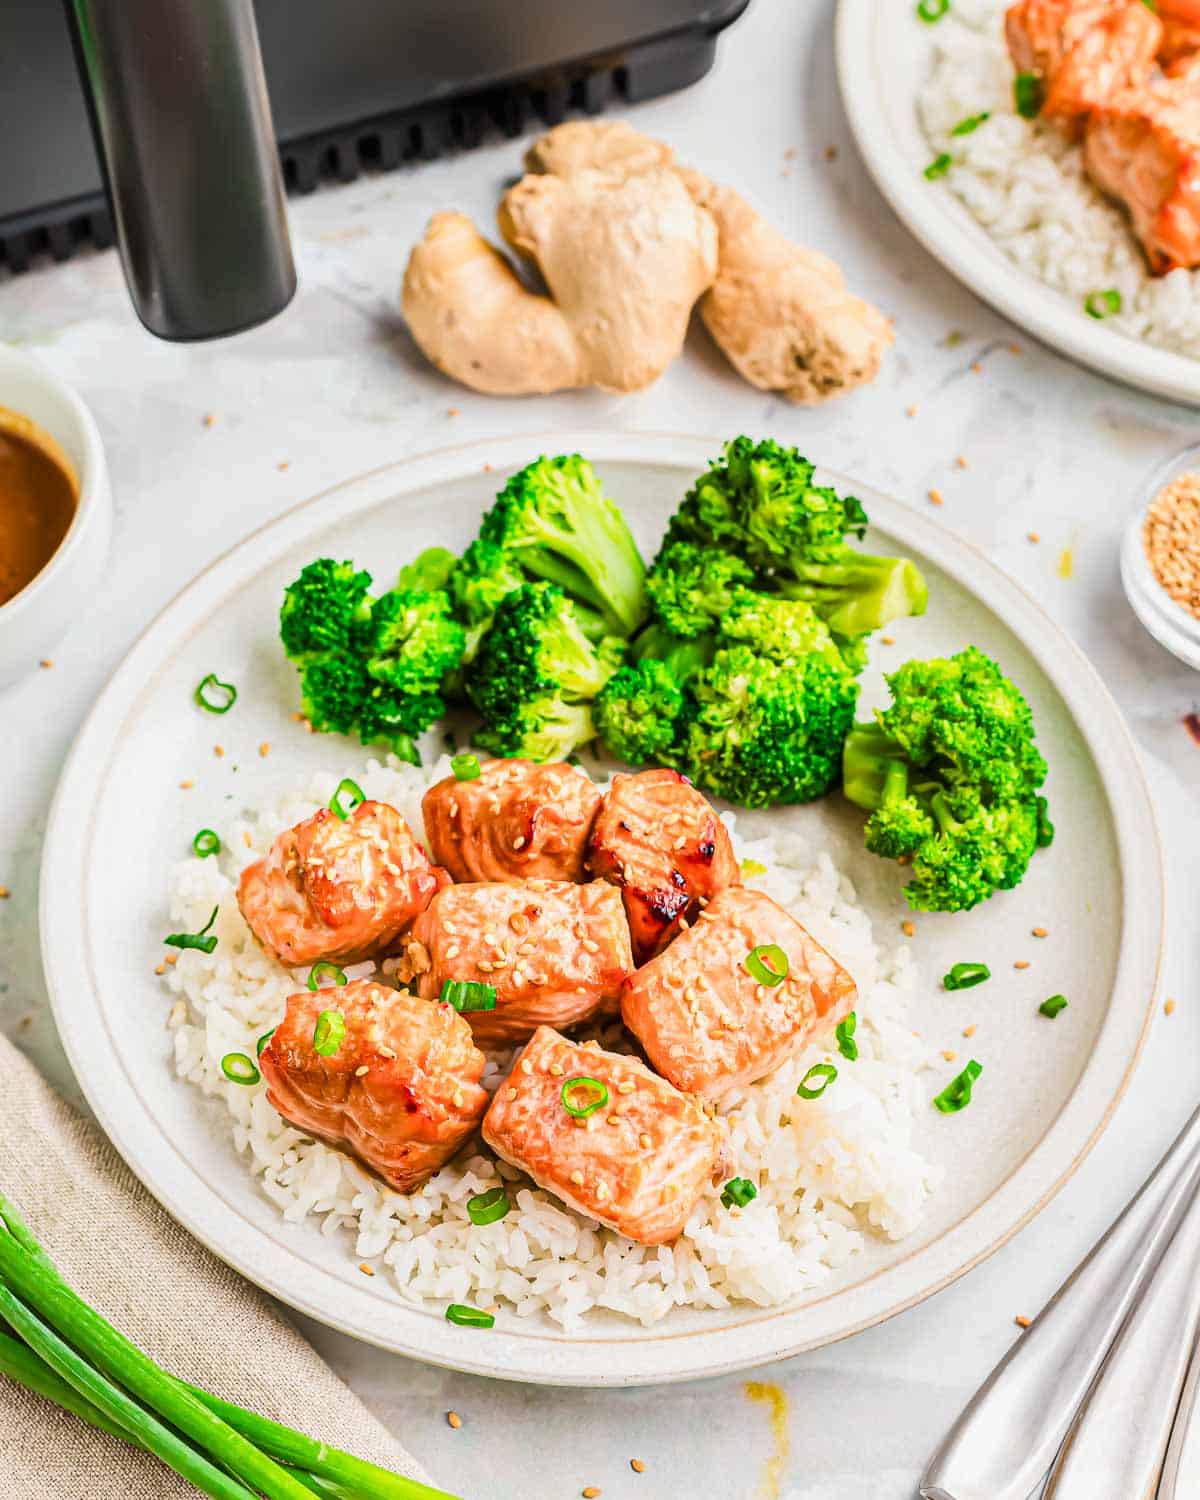 Garlic ginger soy salmon bites made in the air fryer served with white rice, broccoli and scallion garnish.